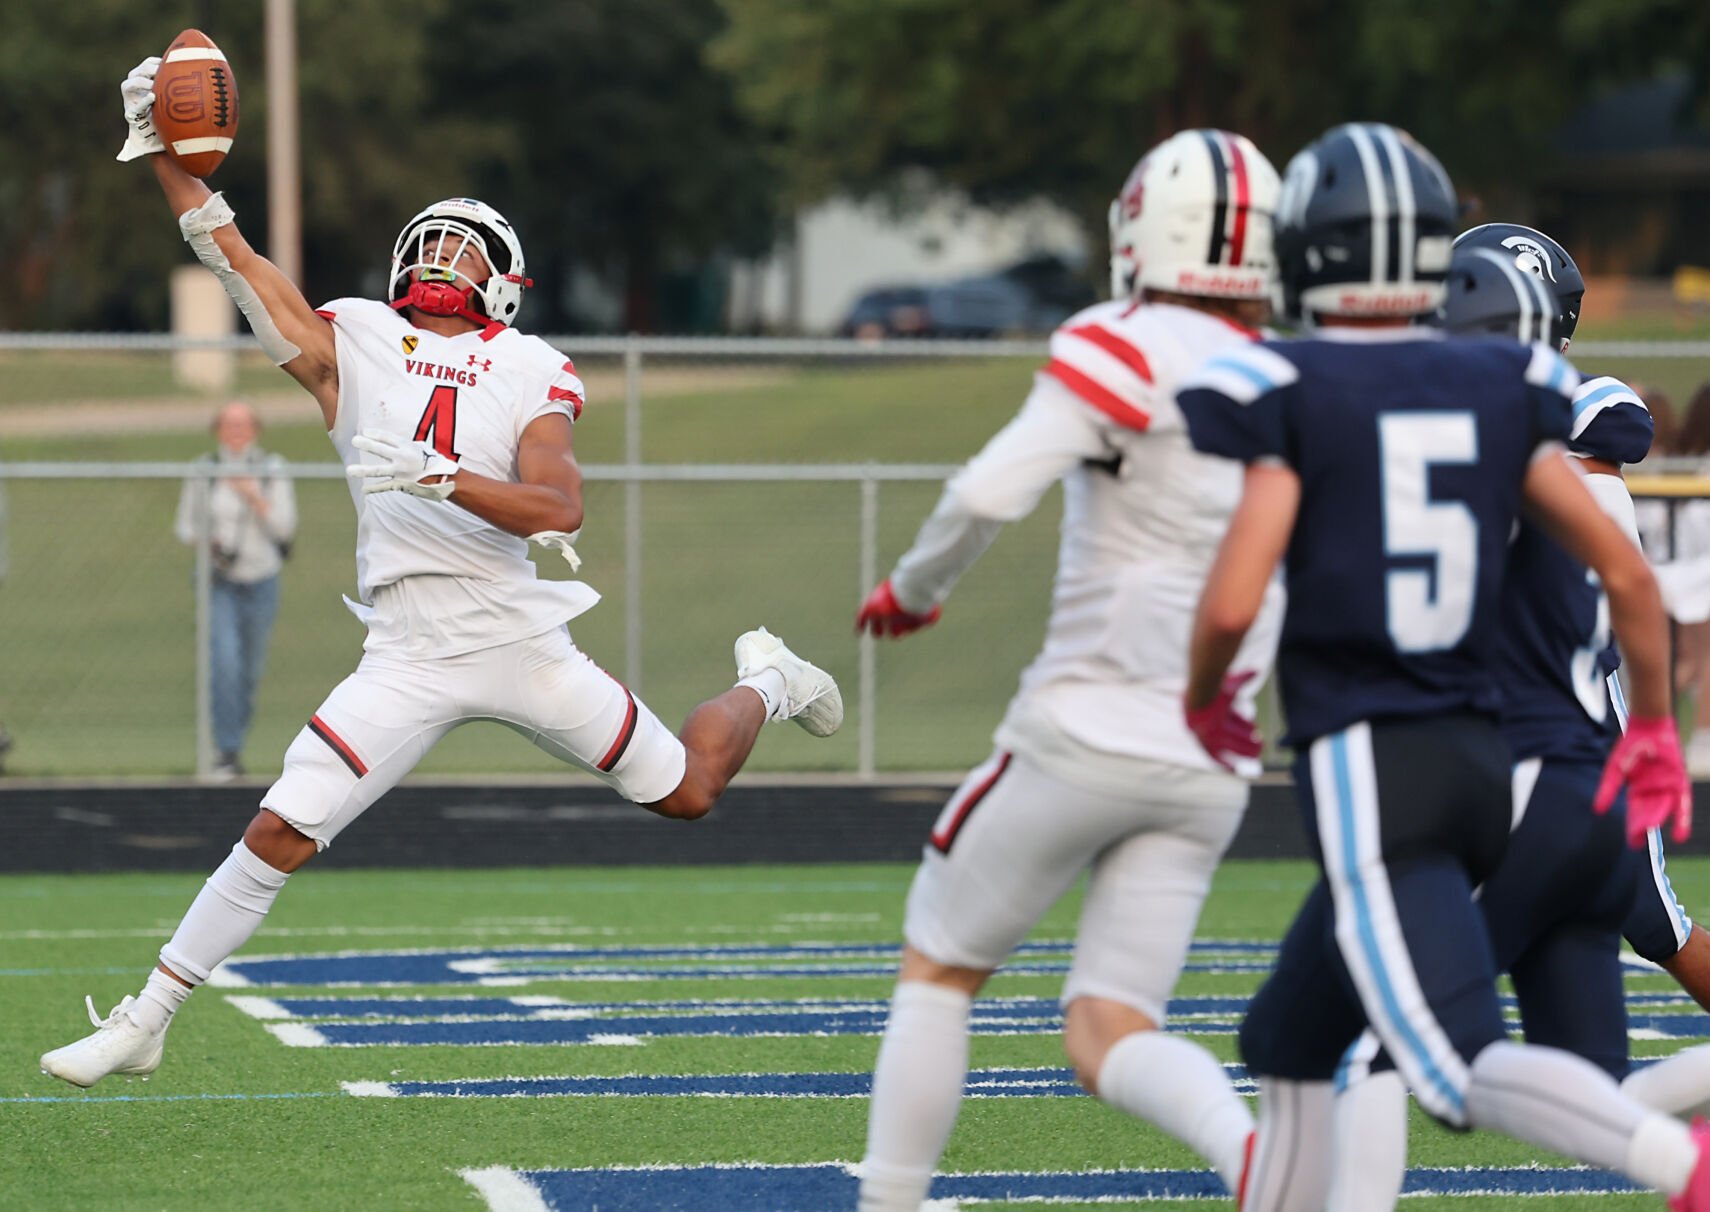 Top 10 High School Football Receivers and Tight Ends in the Madison Area